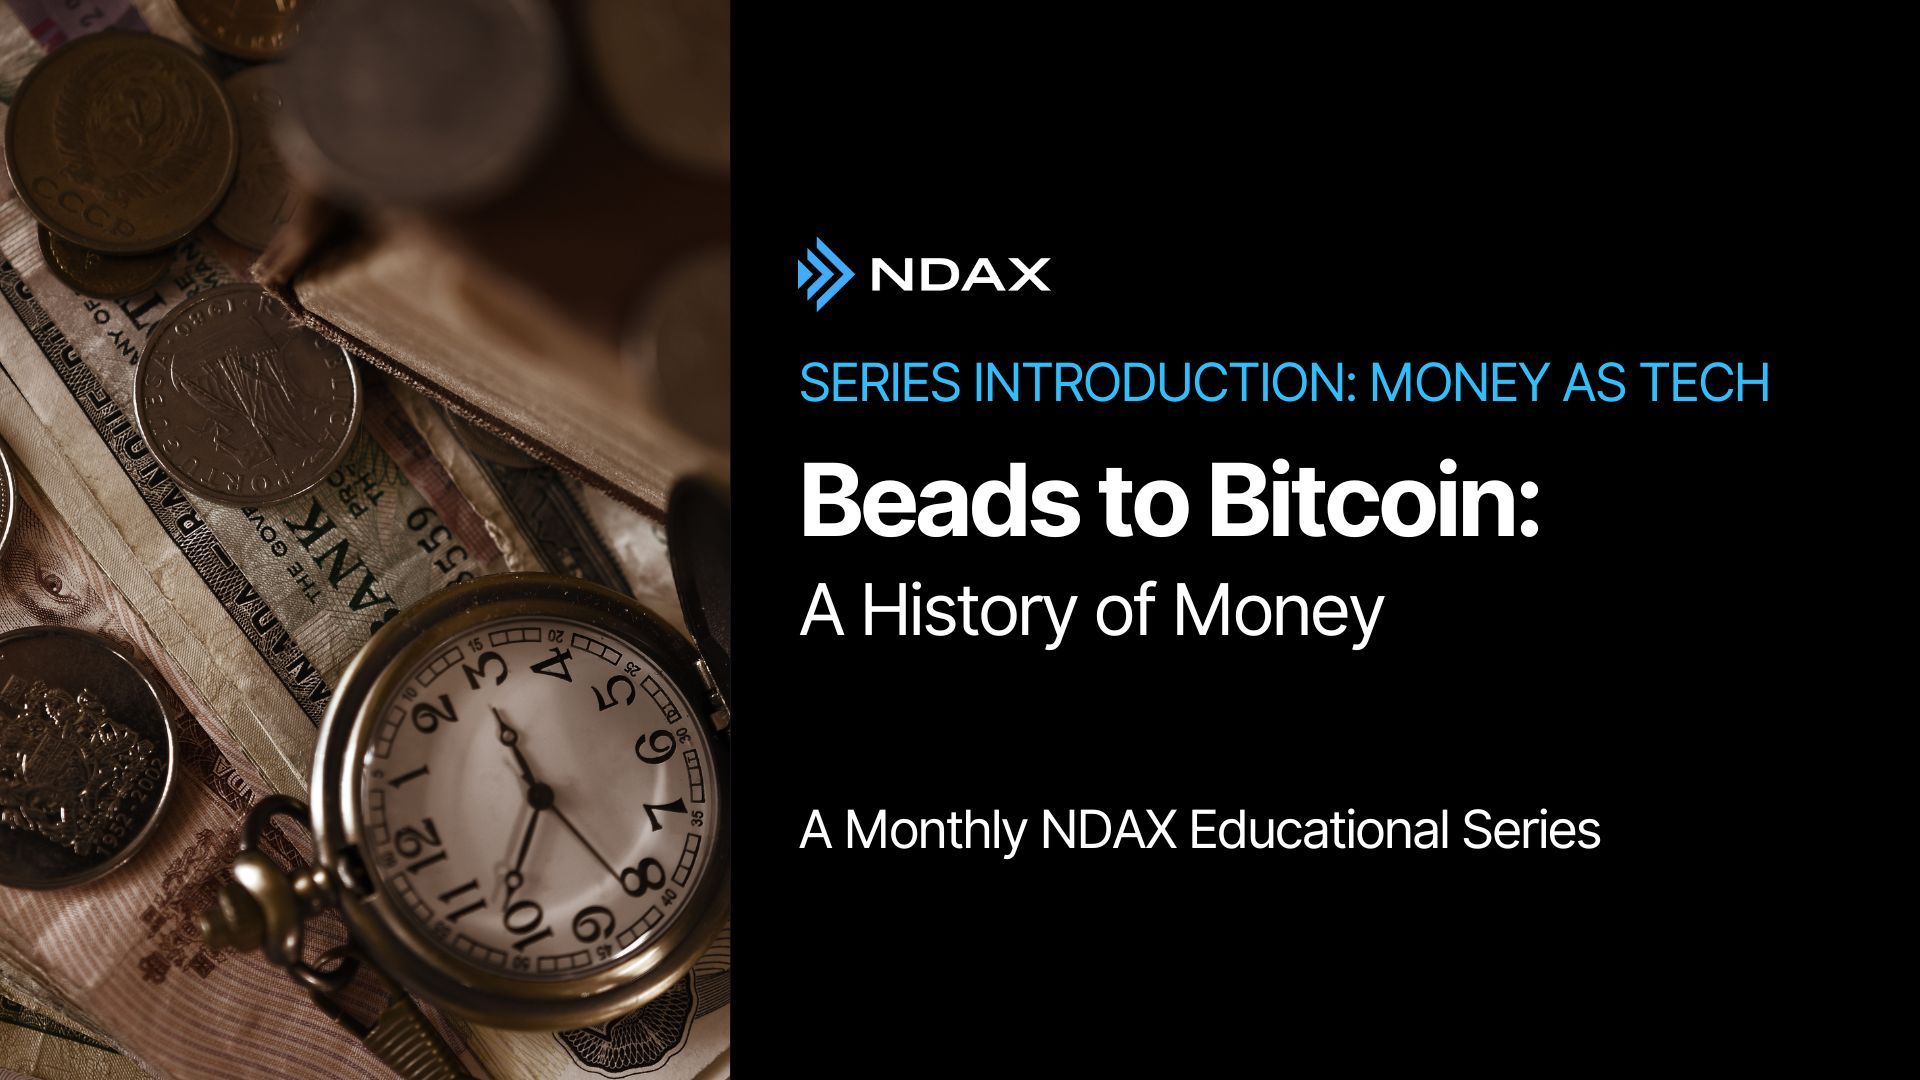 BEADS TO BITCOIN  Series Introduction: Money as Tech - Who Benefits?